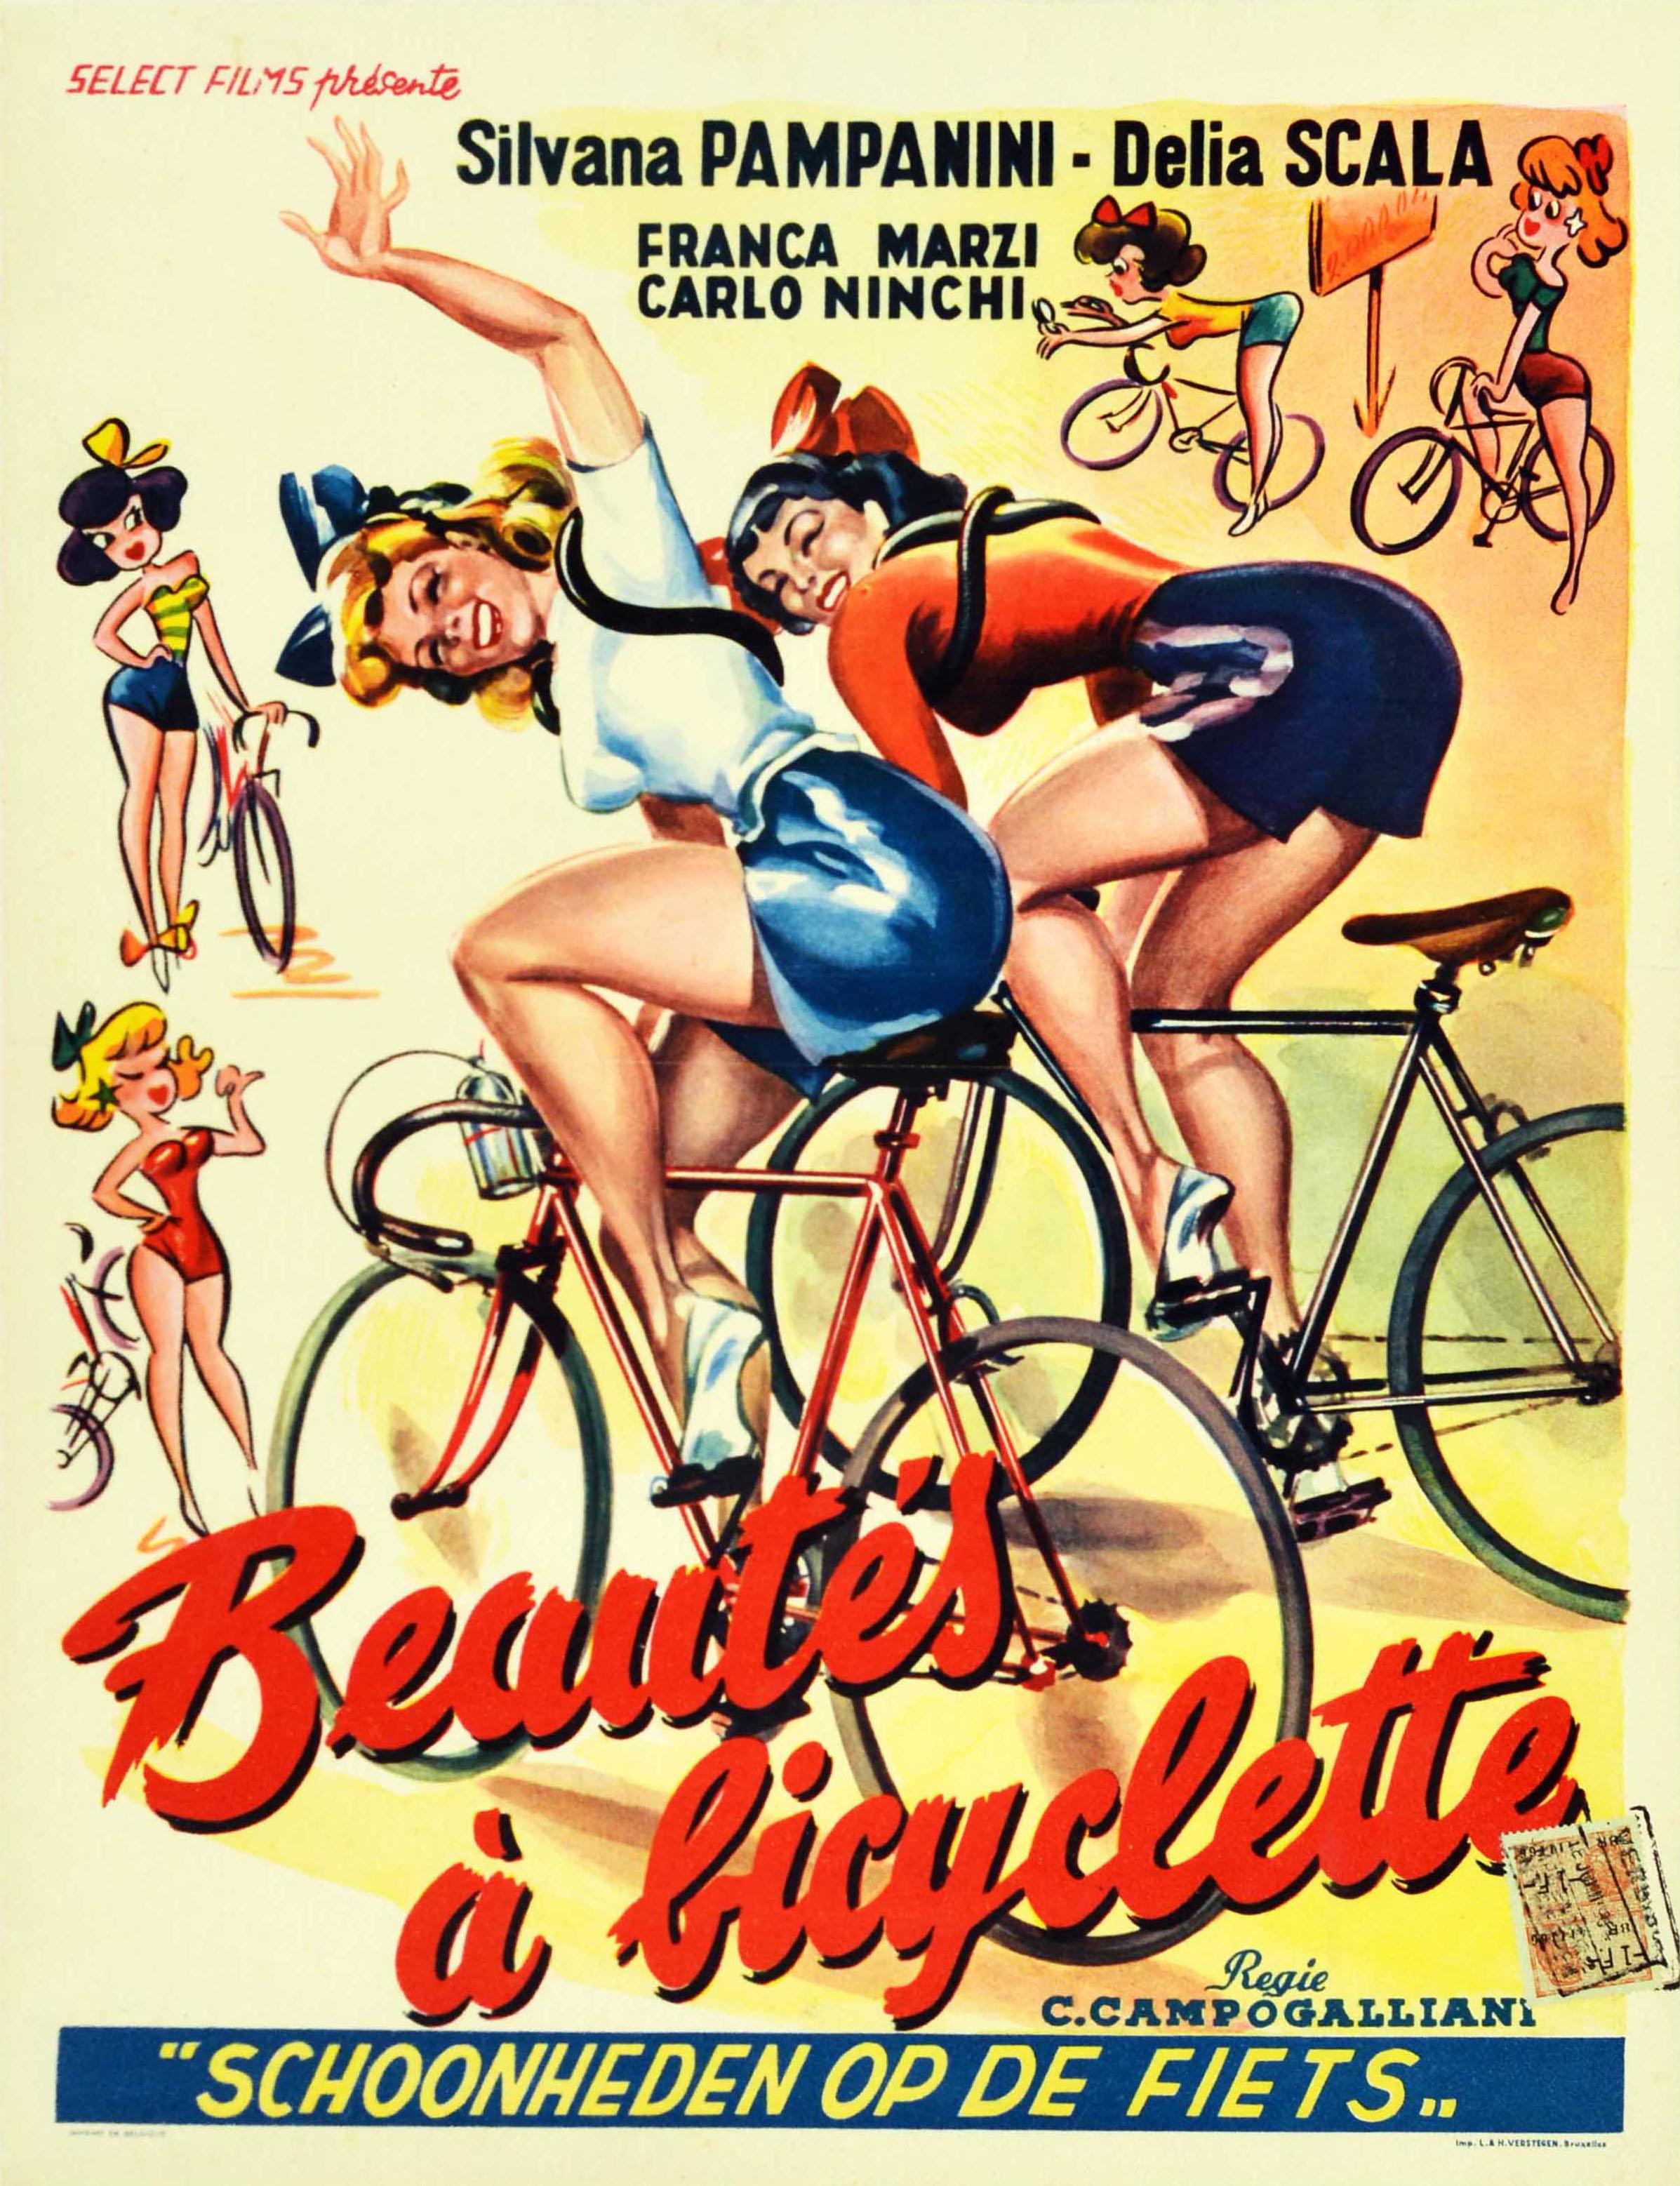 Unknown Print - Original Vintage Film Poster Beautes A Bicyclette Bicycle Beauties Comedy Movie